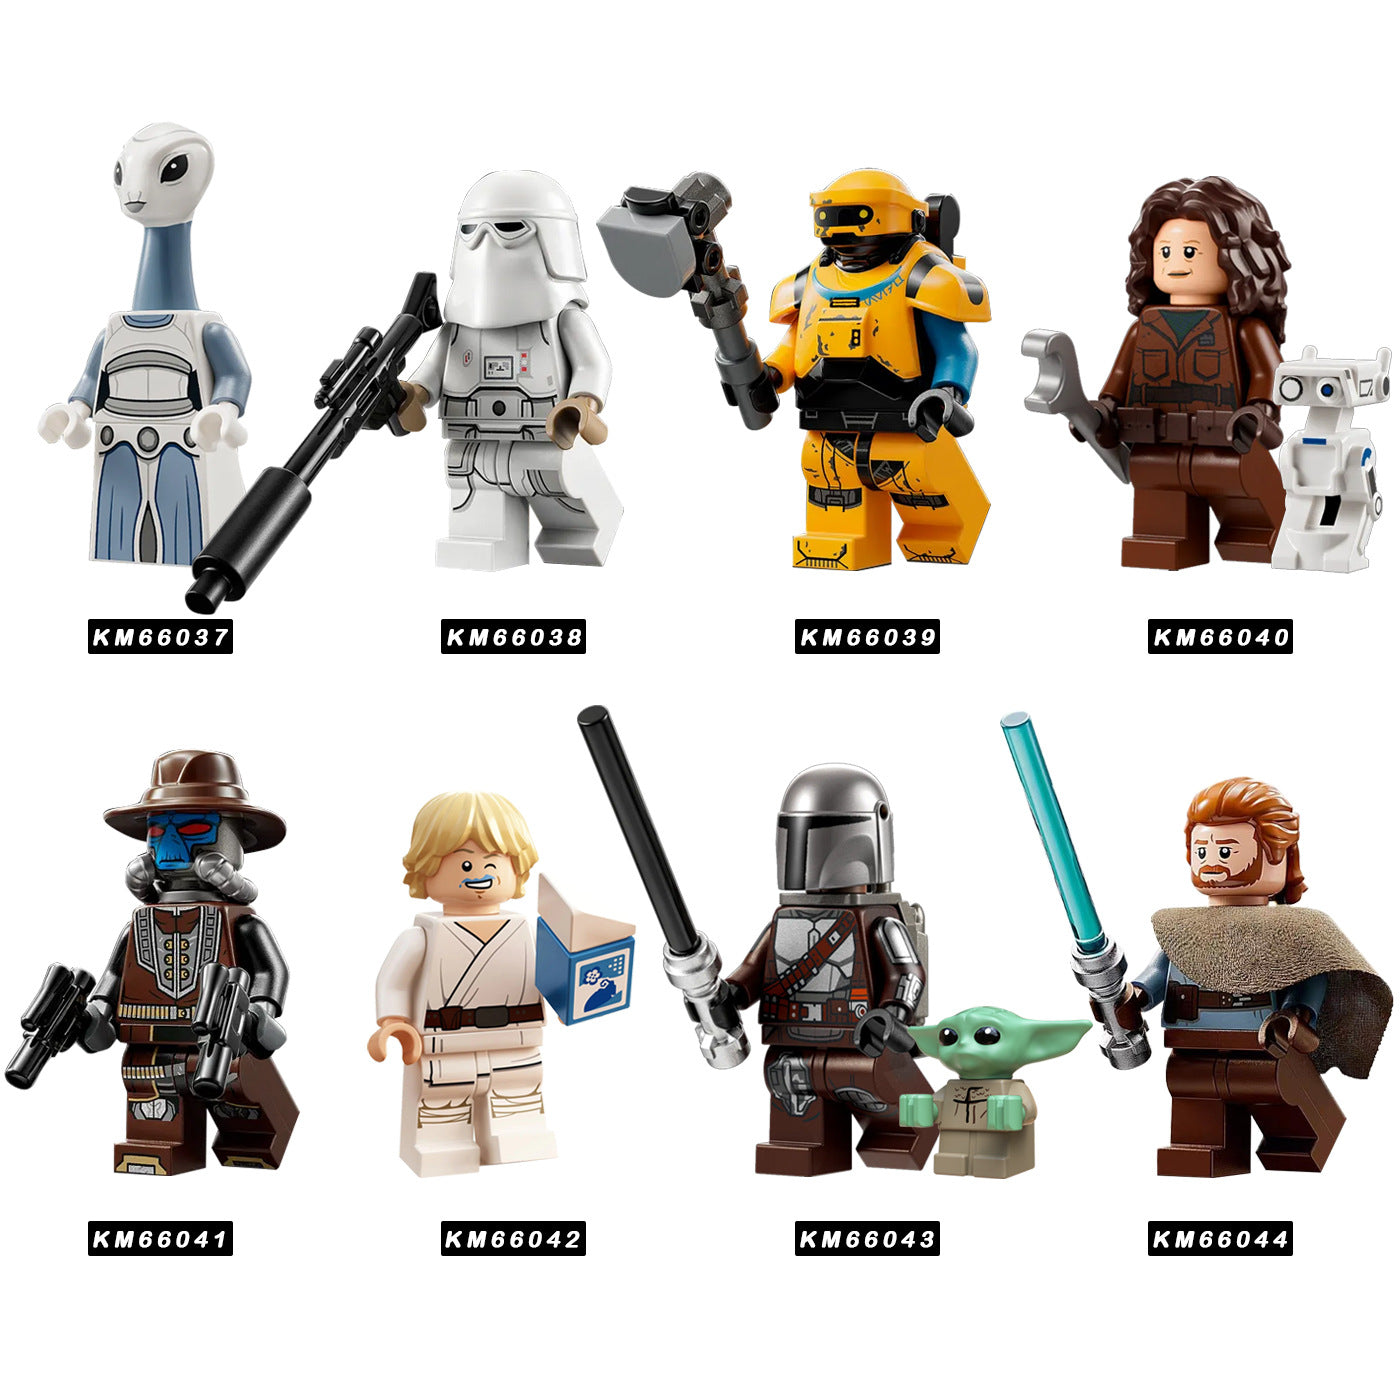 Star Wars Mini Figure Compatible With Lego Toys Building Blocks